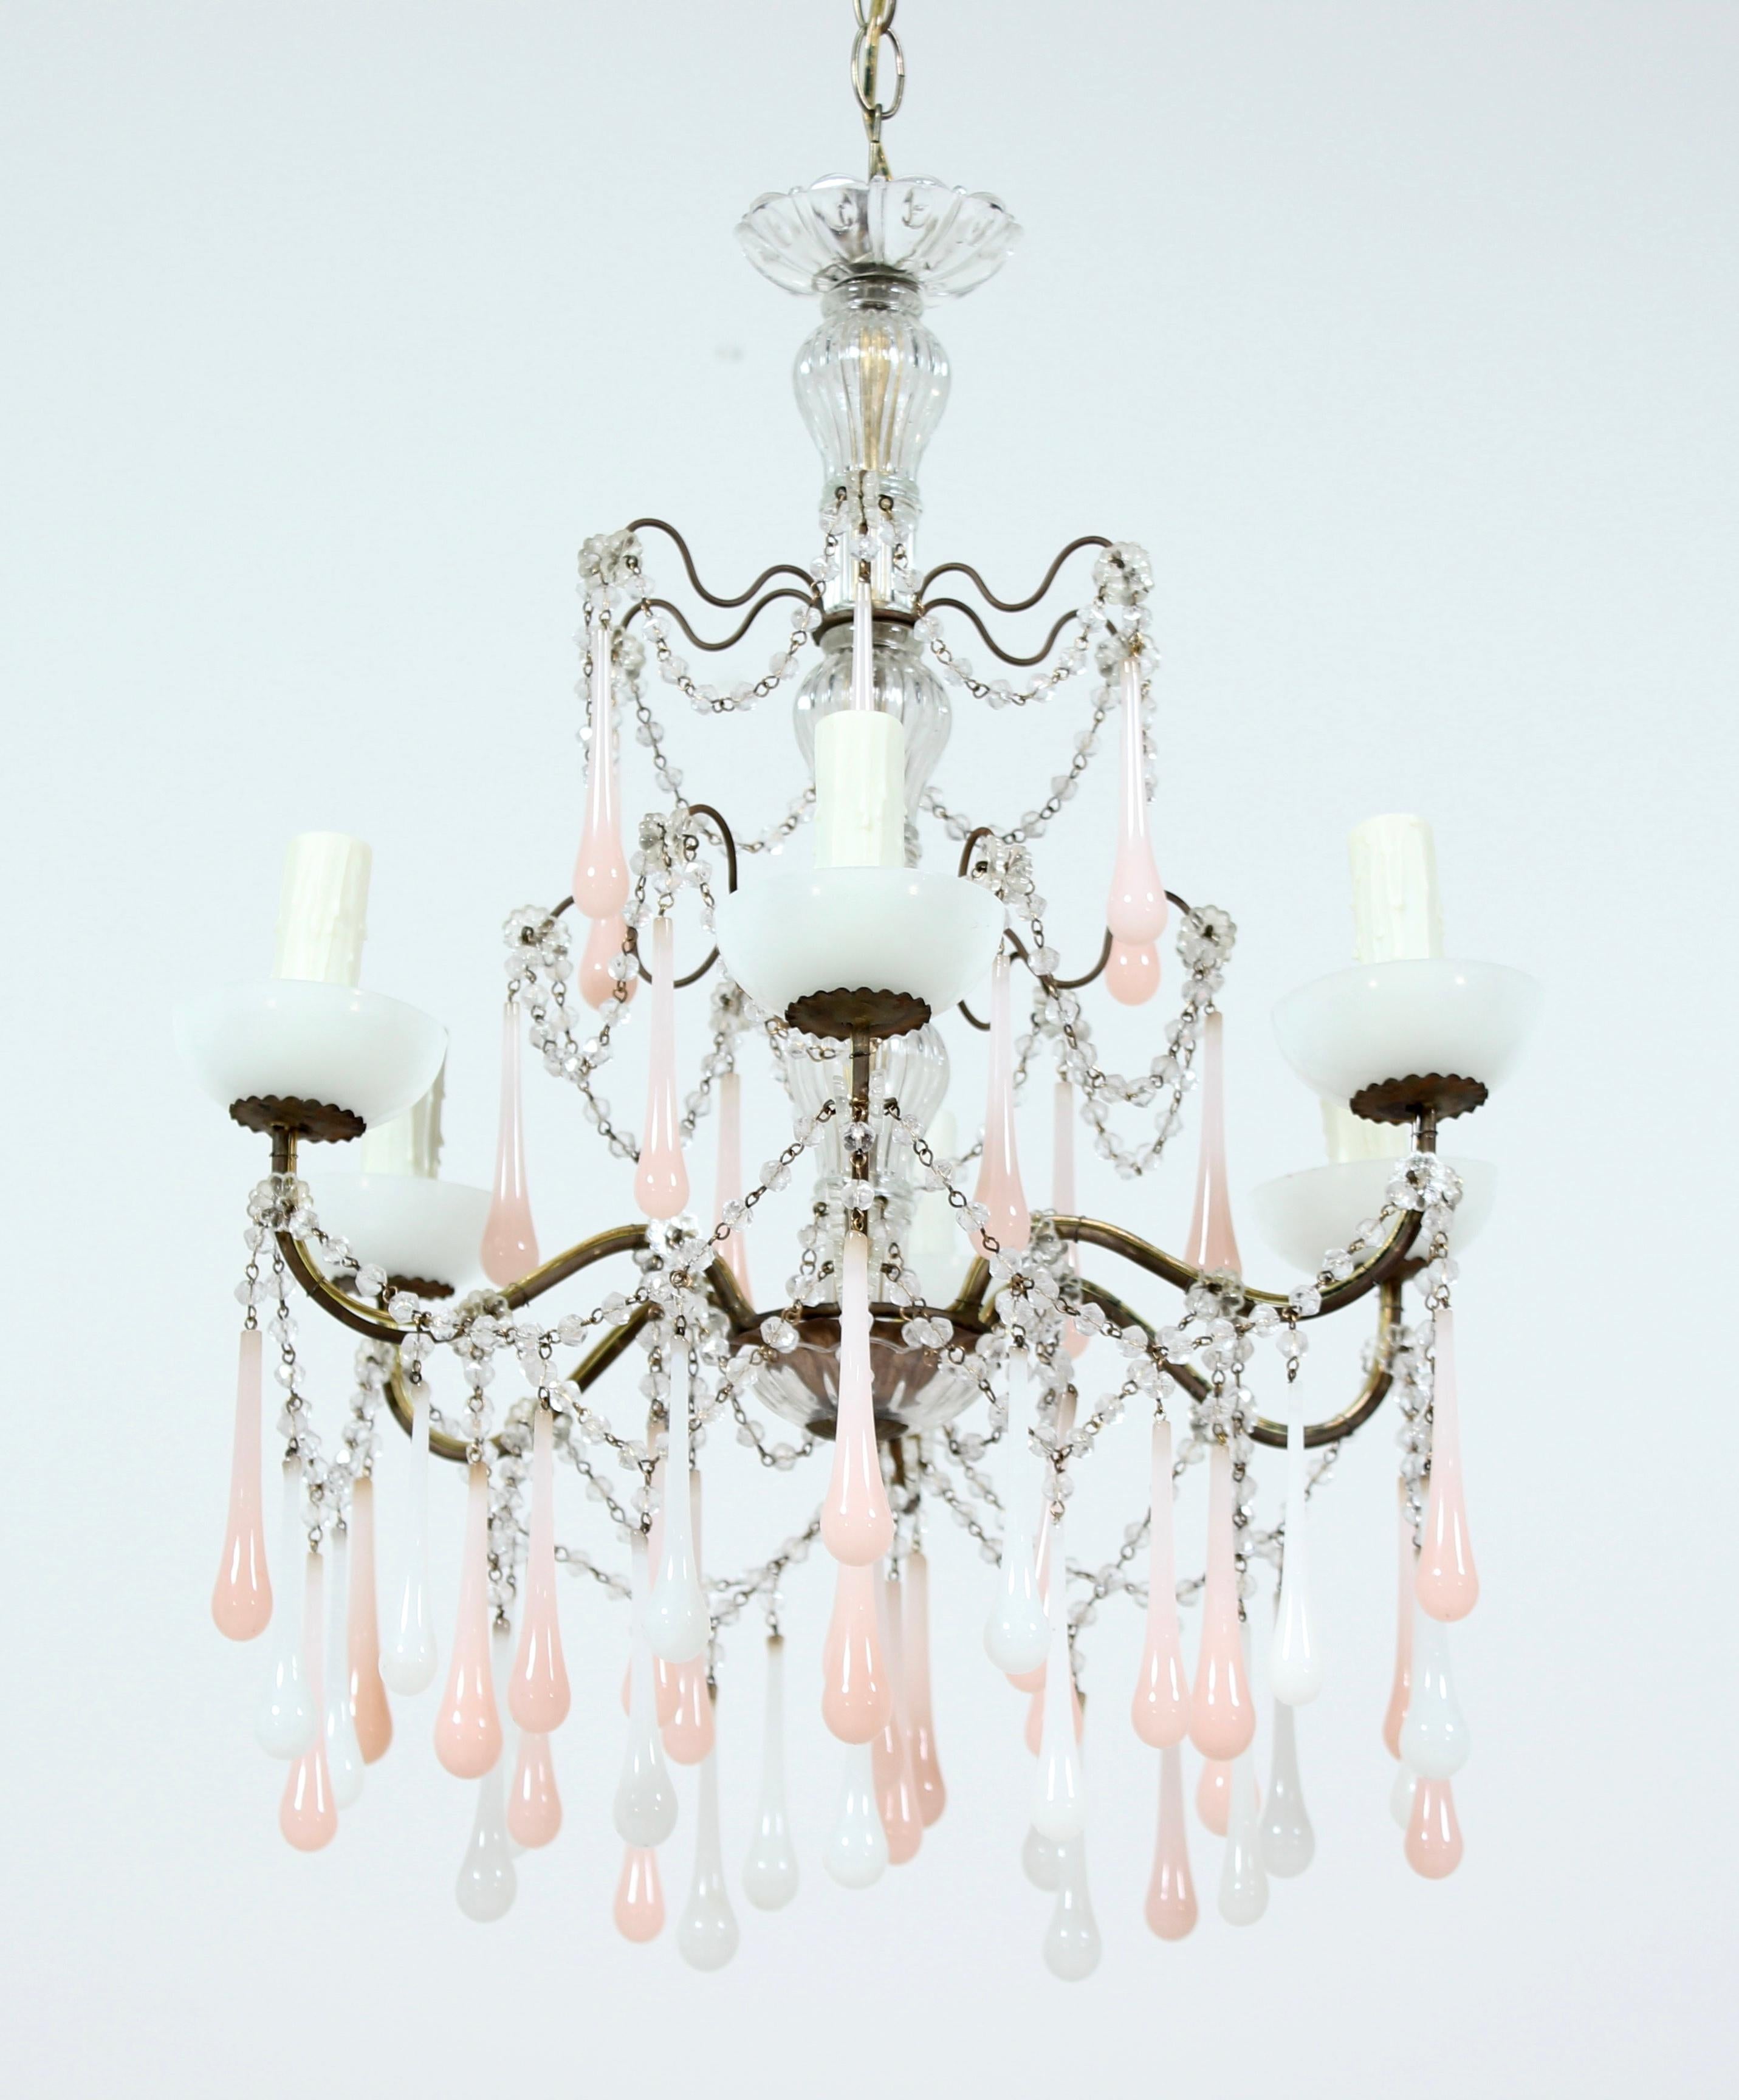 1950s Italian crystal beaded chandelier with a beautiful combination of pink and white glass opaline drops and bobeches. 

This delicate chandelier would look so beautiful in a powder room or in a girl’s room.            

The chandelier is newly